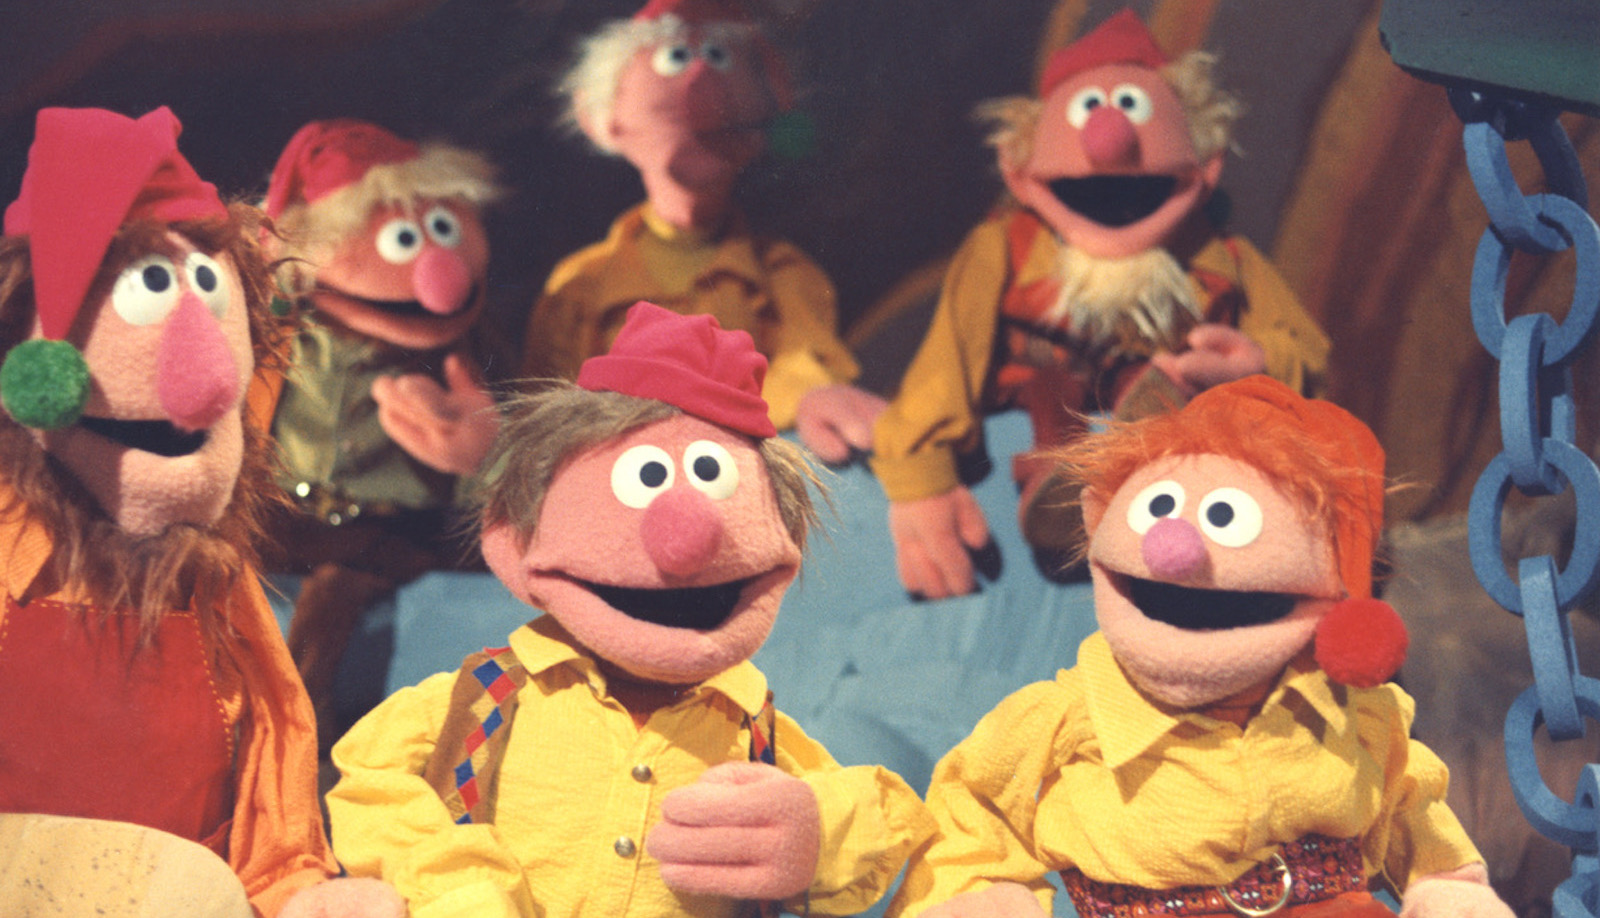 Muppet elves in yellow shirts smiling at the camera